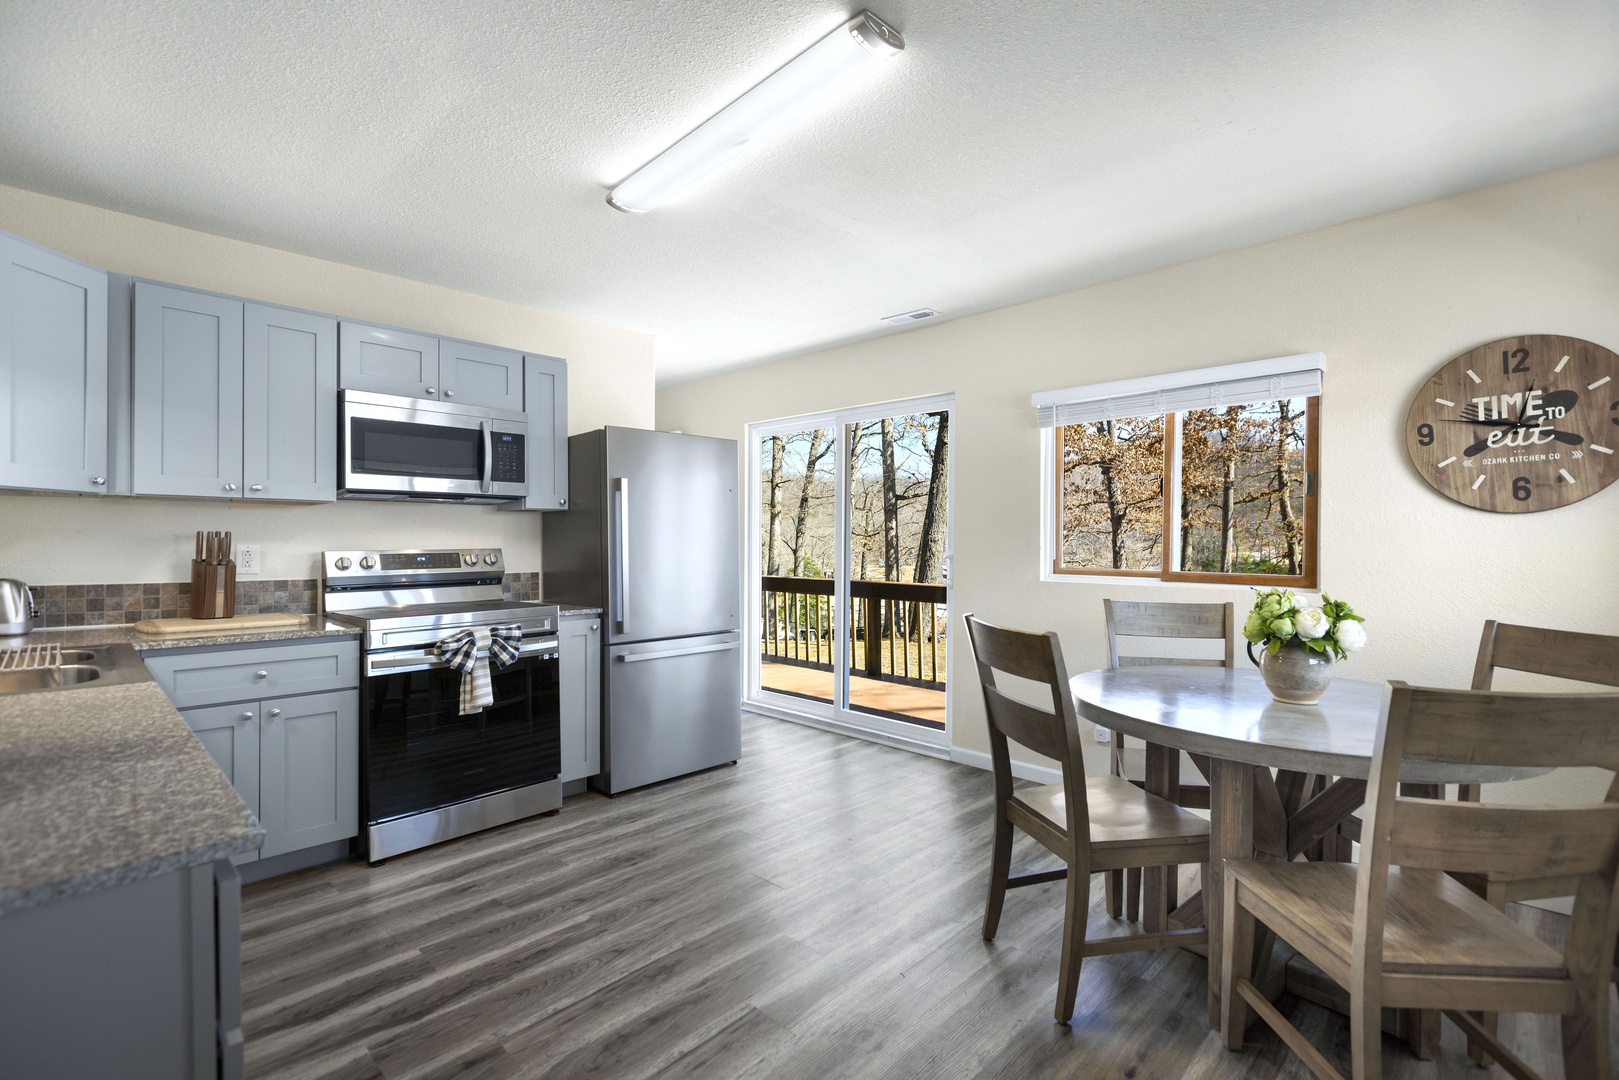 The 1st of 2 full kitchens offers ample space & all the comforts of home